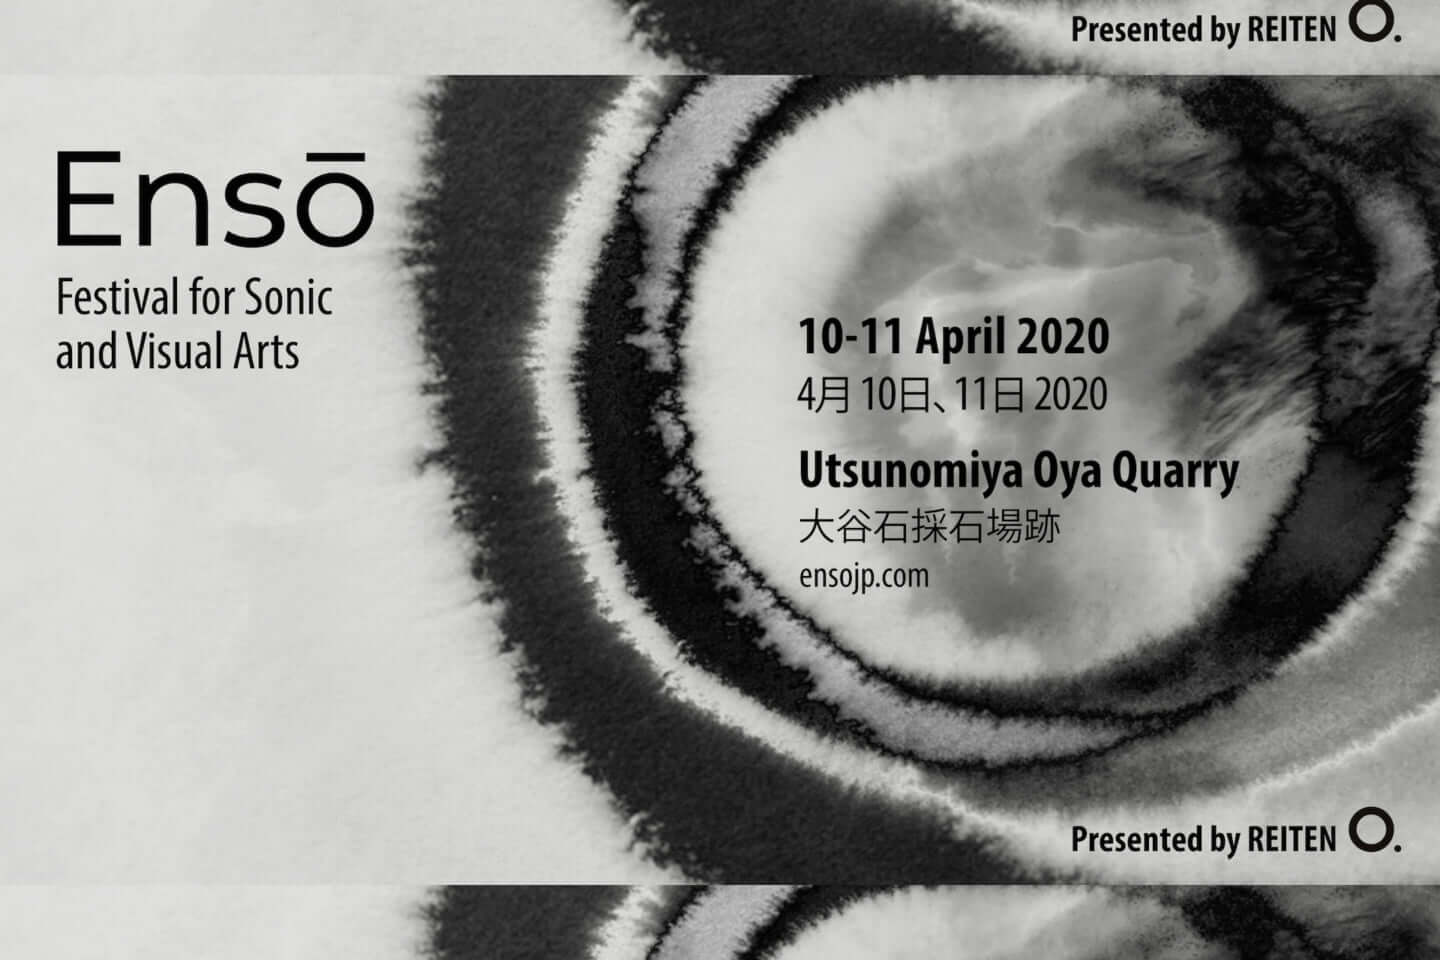 REITEN presents Ensō "Festival for Sonic and Visual Arts"